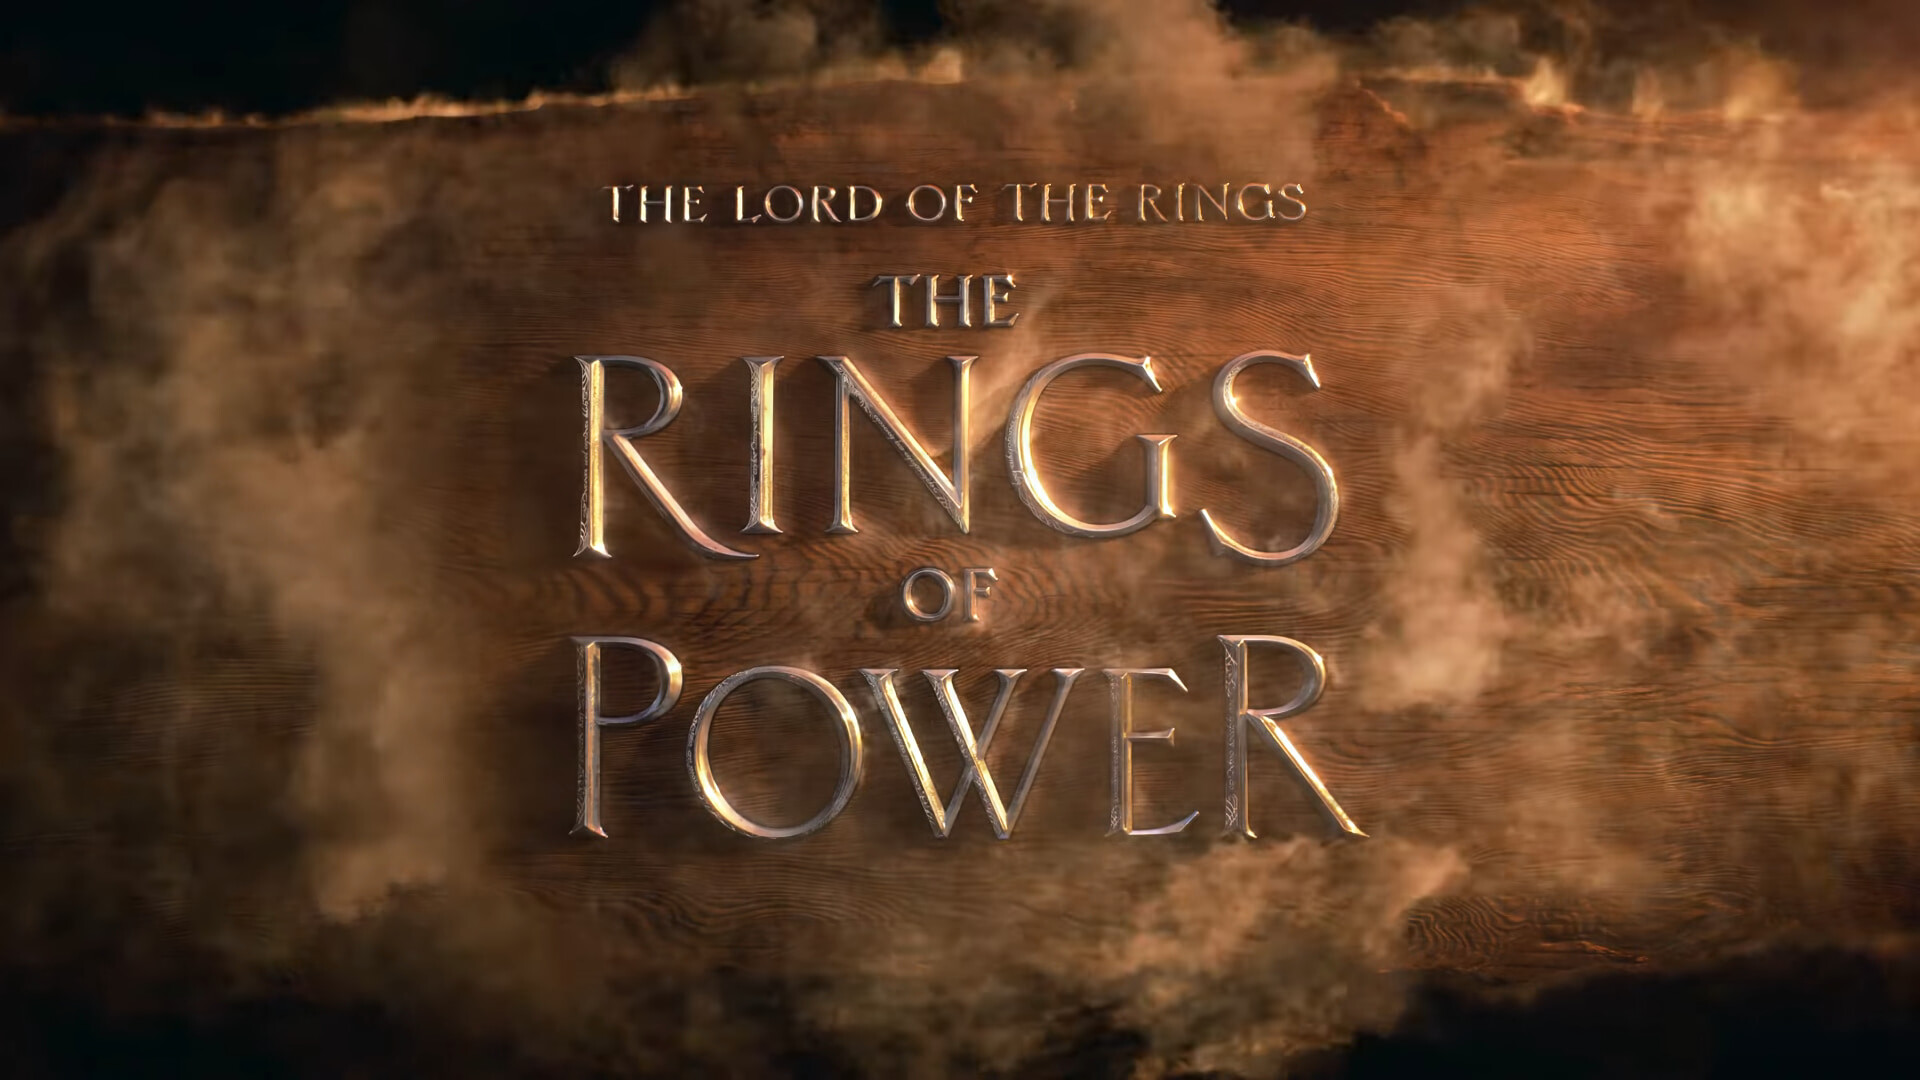 The Lord of the Rings, The Rings of Power, HD wallpapers, Background images, 1920x1080 Full HD Desktop